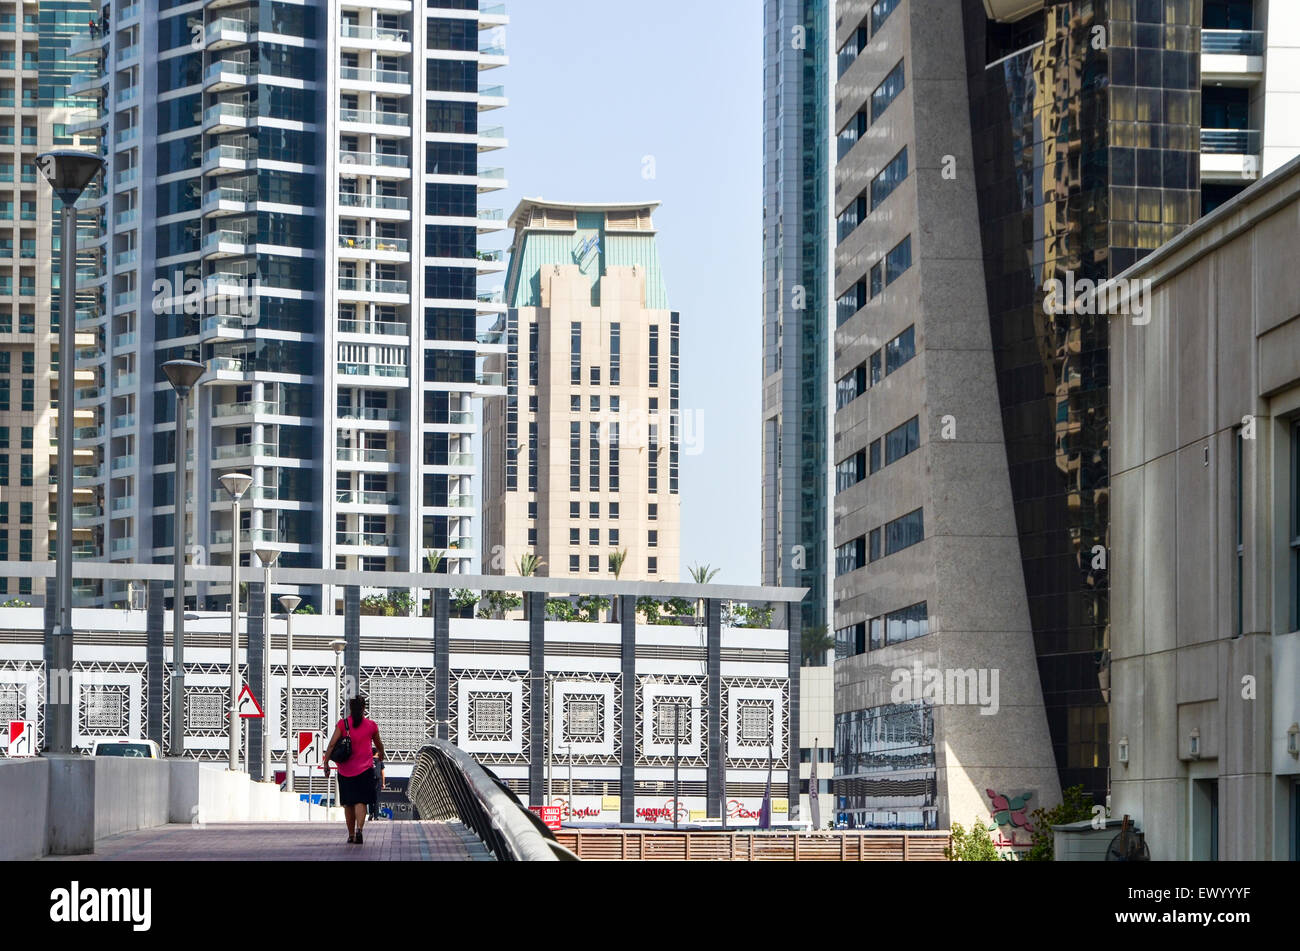 Woman walking between the modern high rise buildings, towers and hotels of the Dubai Marina, United Arab Emirates Stock Photo